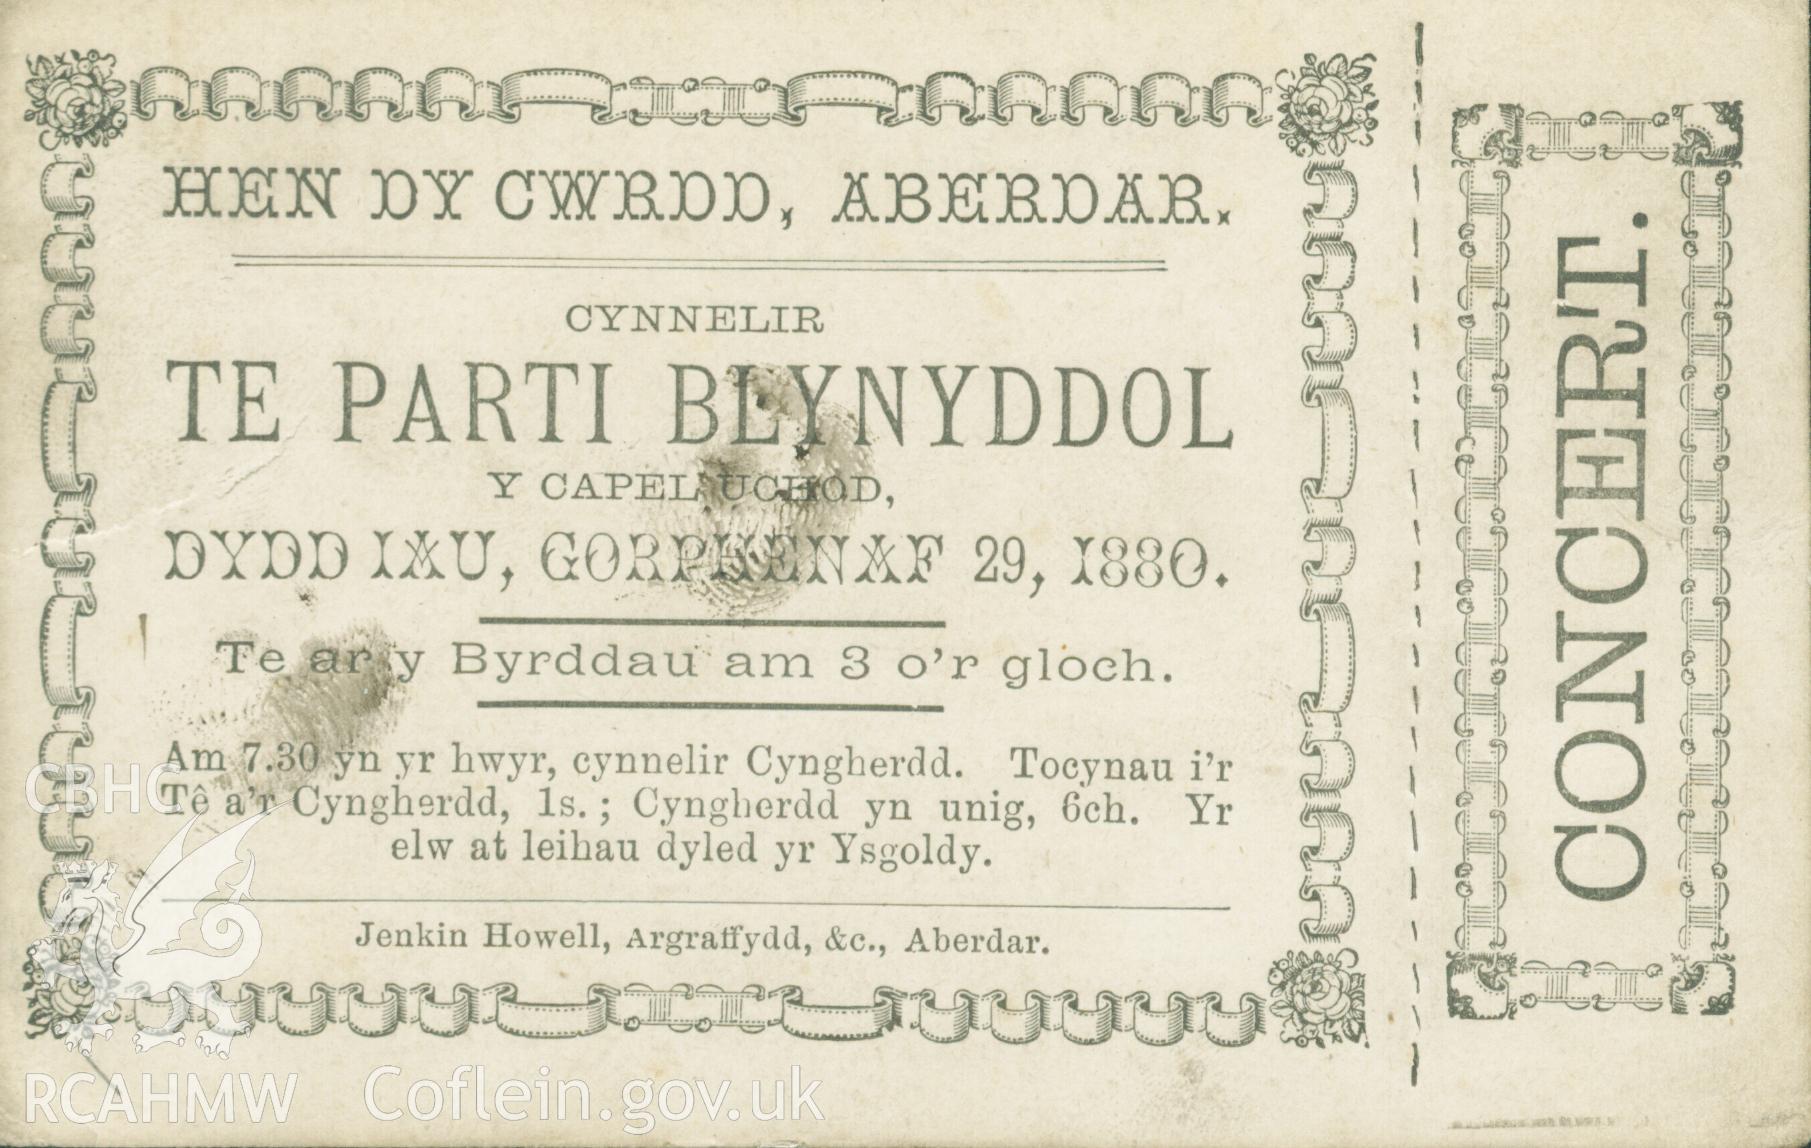 Ticket for the annual tea party and concert at Hen Dy Cwrdd on Thursday, July 29th, 1880. Donated by the Rev. Eric Jones to the RCAHMW as part of the Digital Dissent Project.